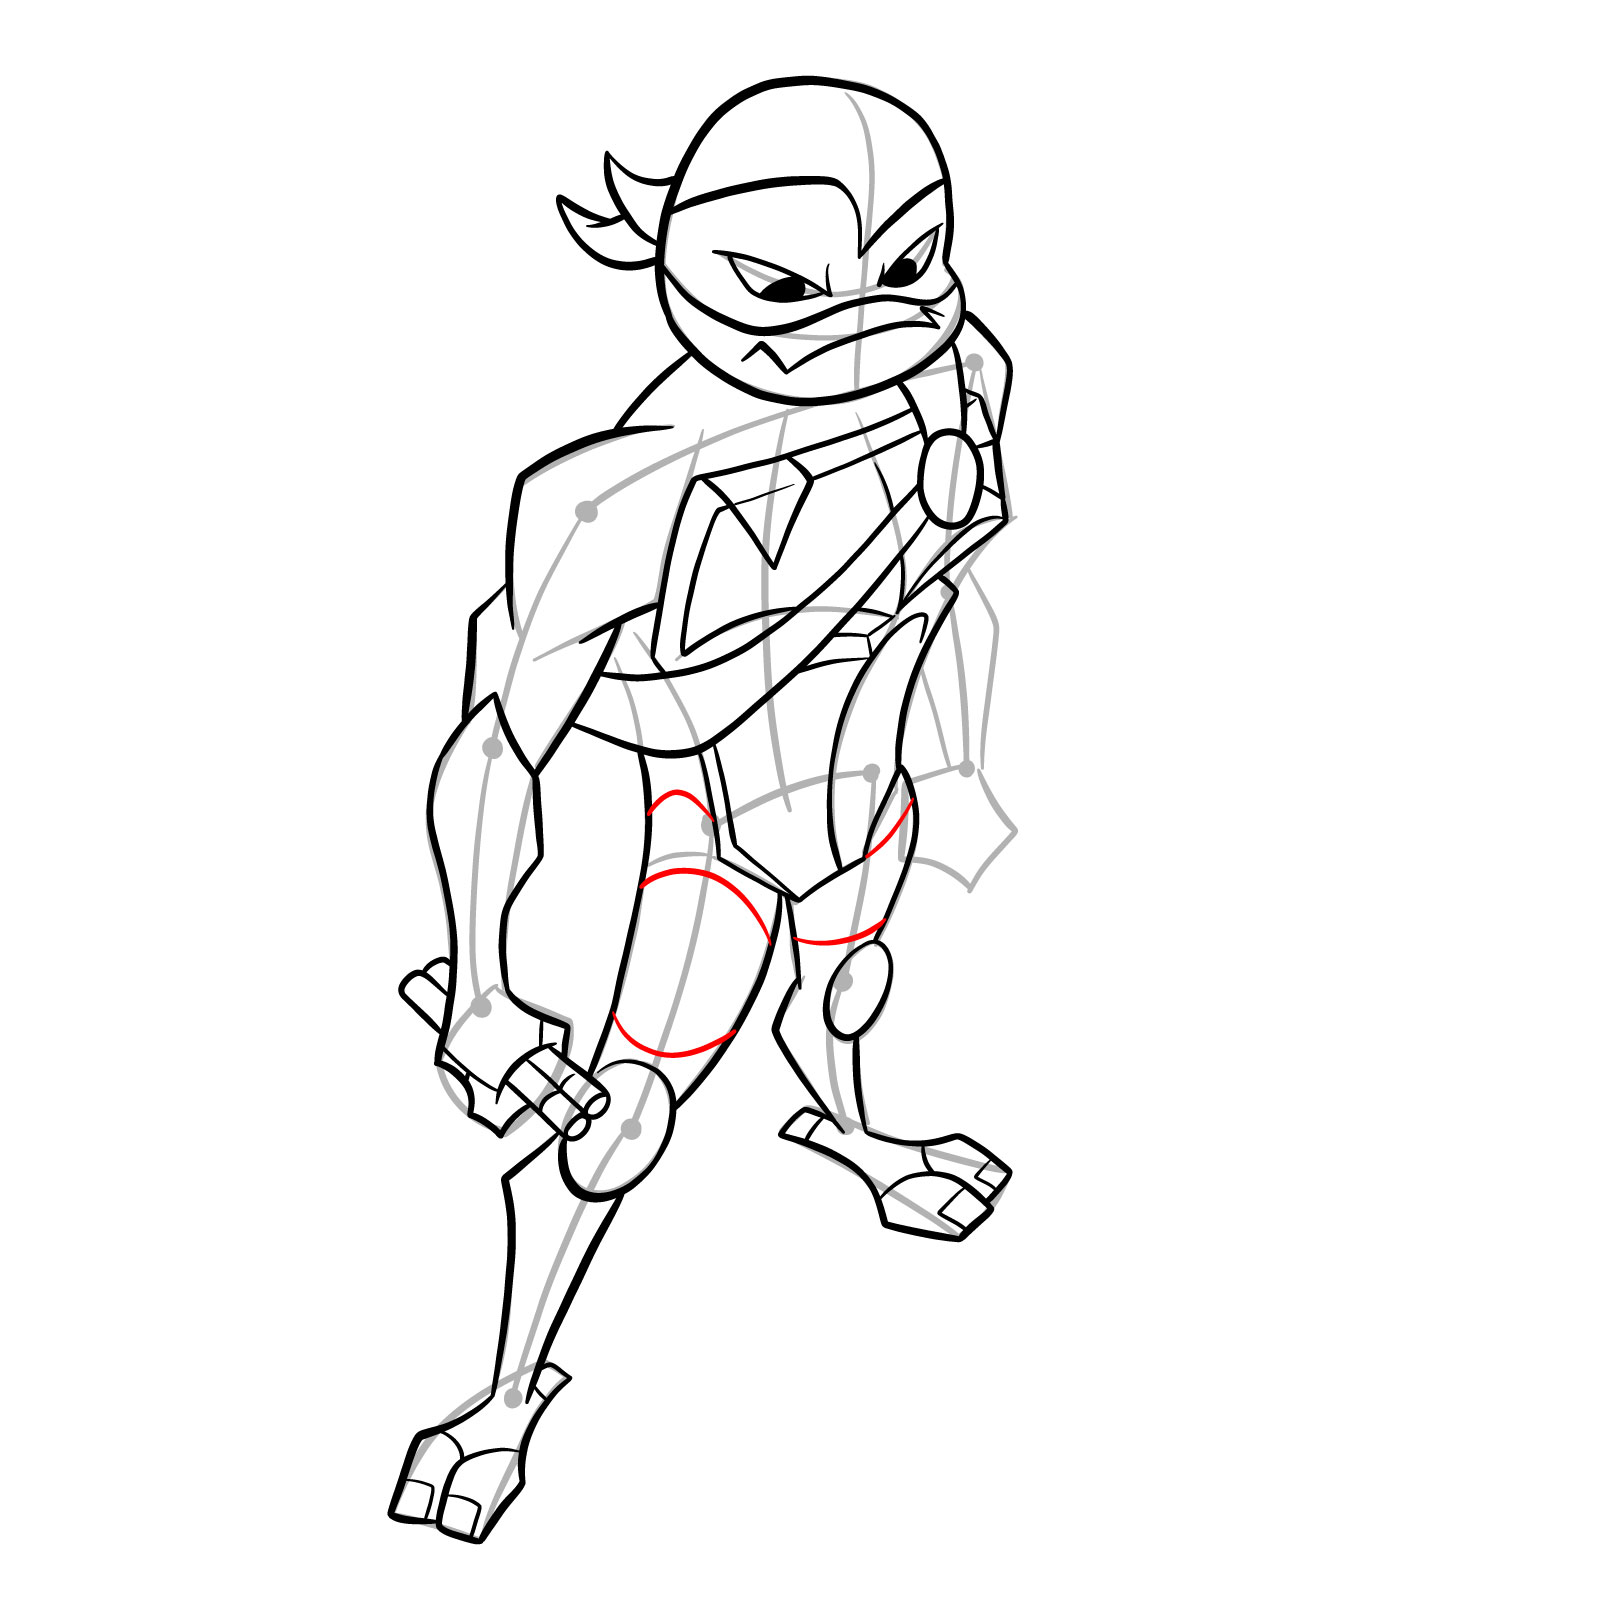 How to draw Mikey in Hamato Ninpō state - step 30